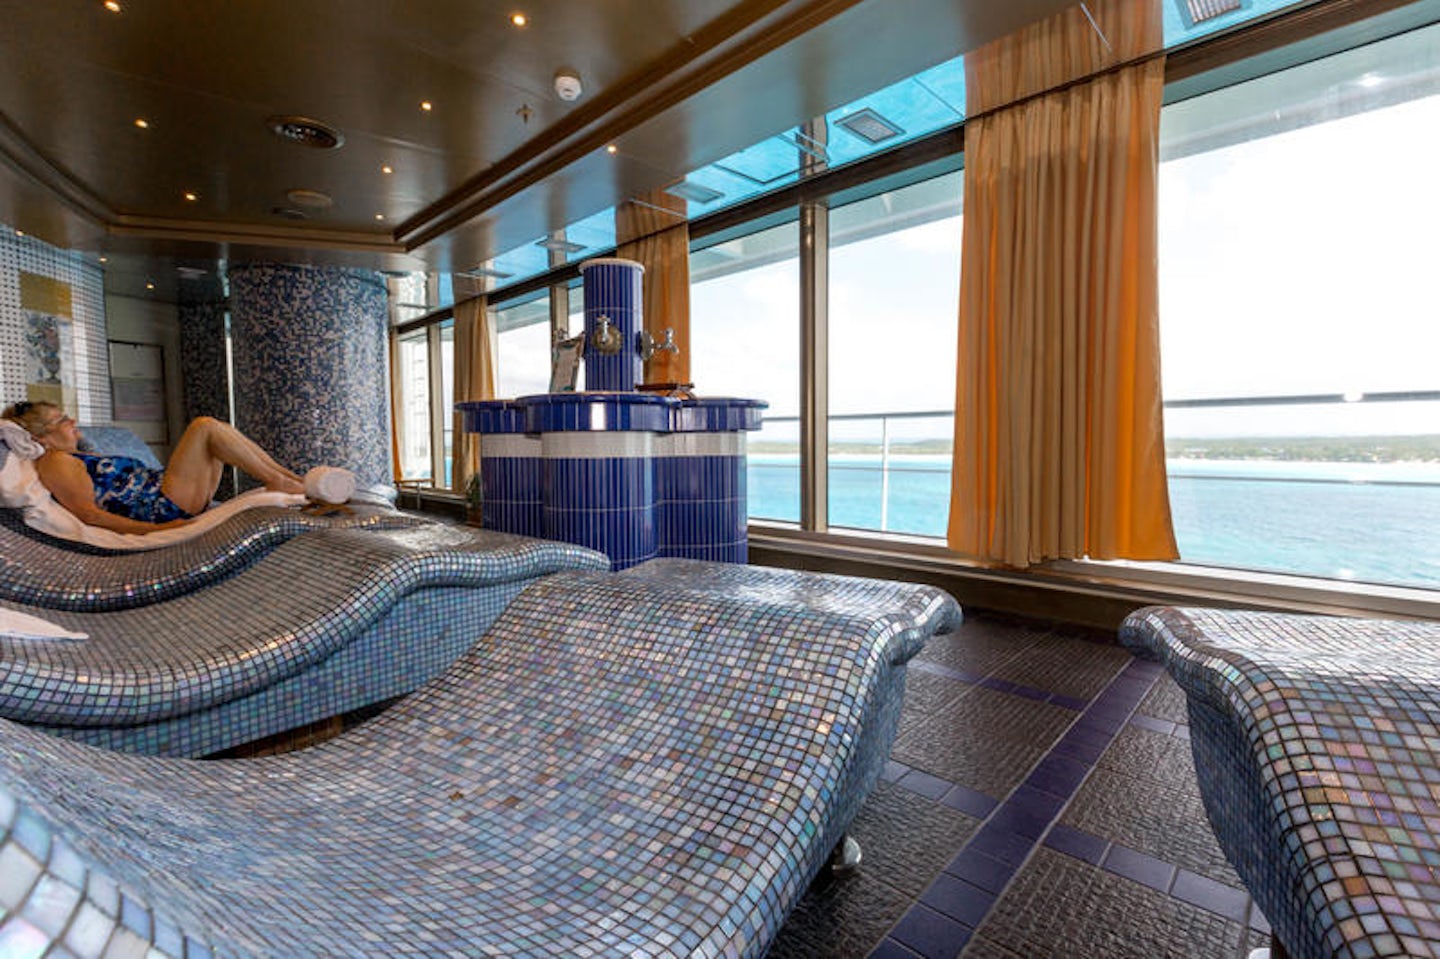 The Greenhouse Spa Thermal Suite on Zuiderdam